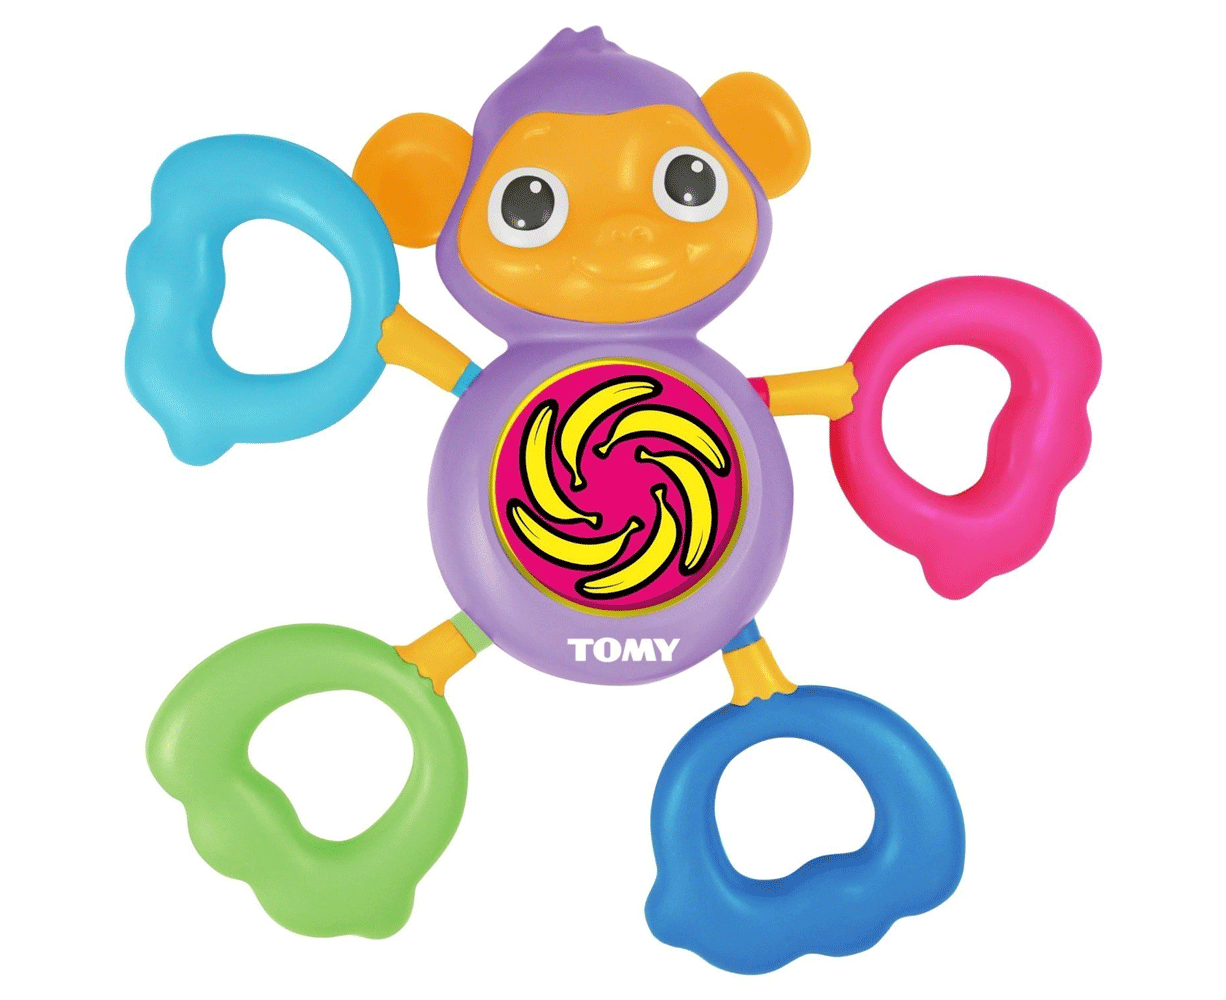 Tomy Grip and Grab Musical Monkey Sound Playing/Activity Toy for Baby/Toddler